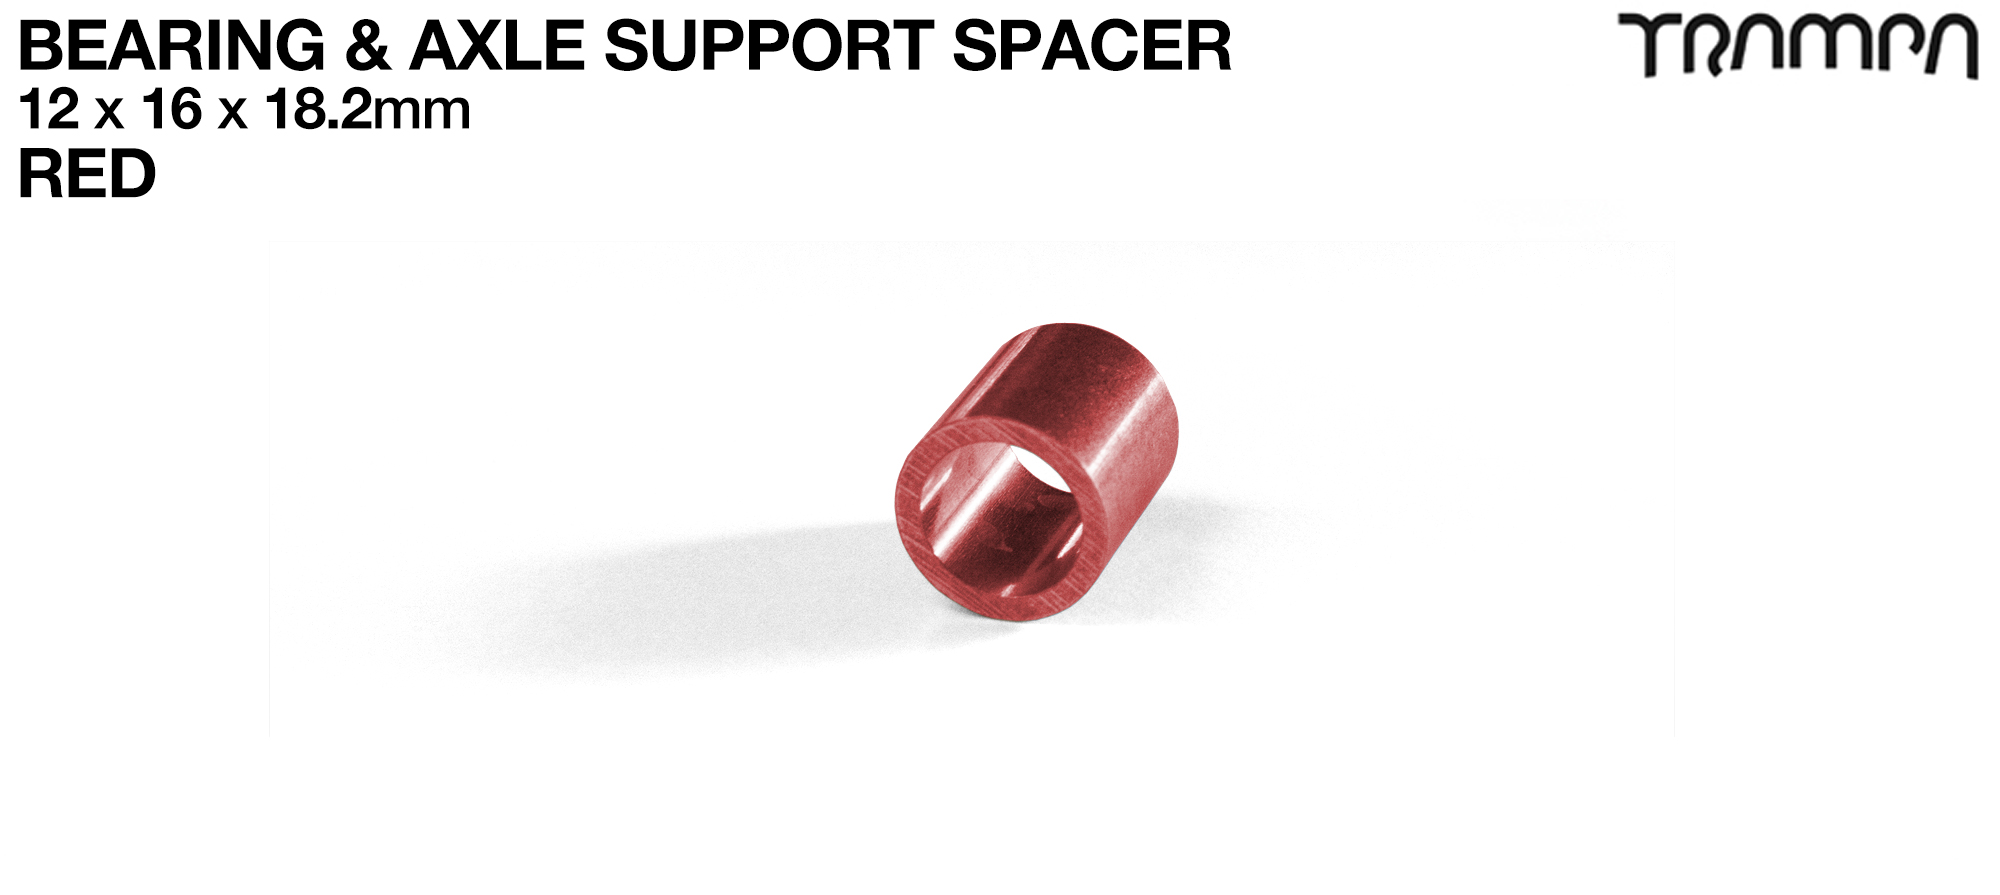 18.2mm Wheel Support Axle Spacers - RED x2